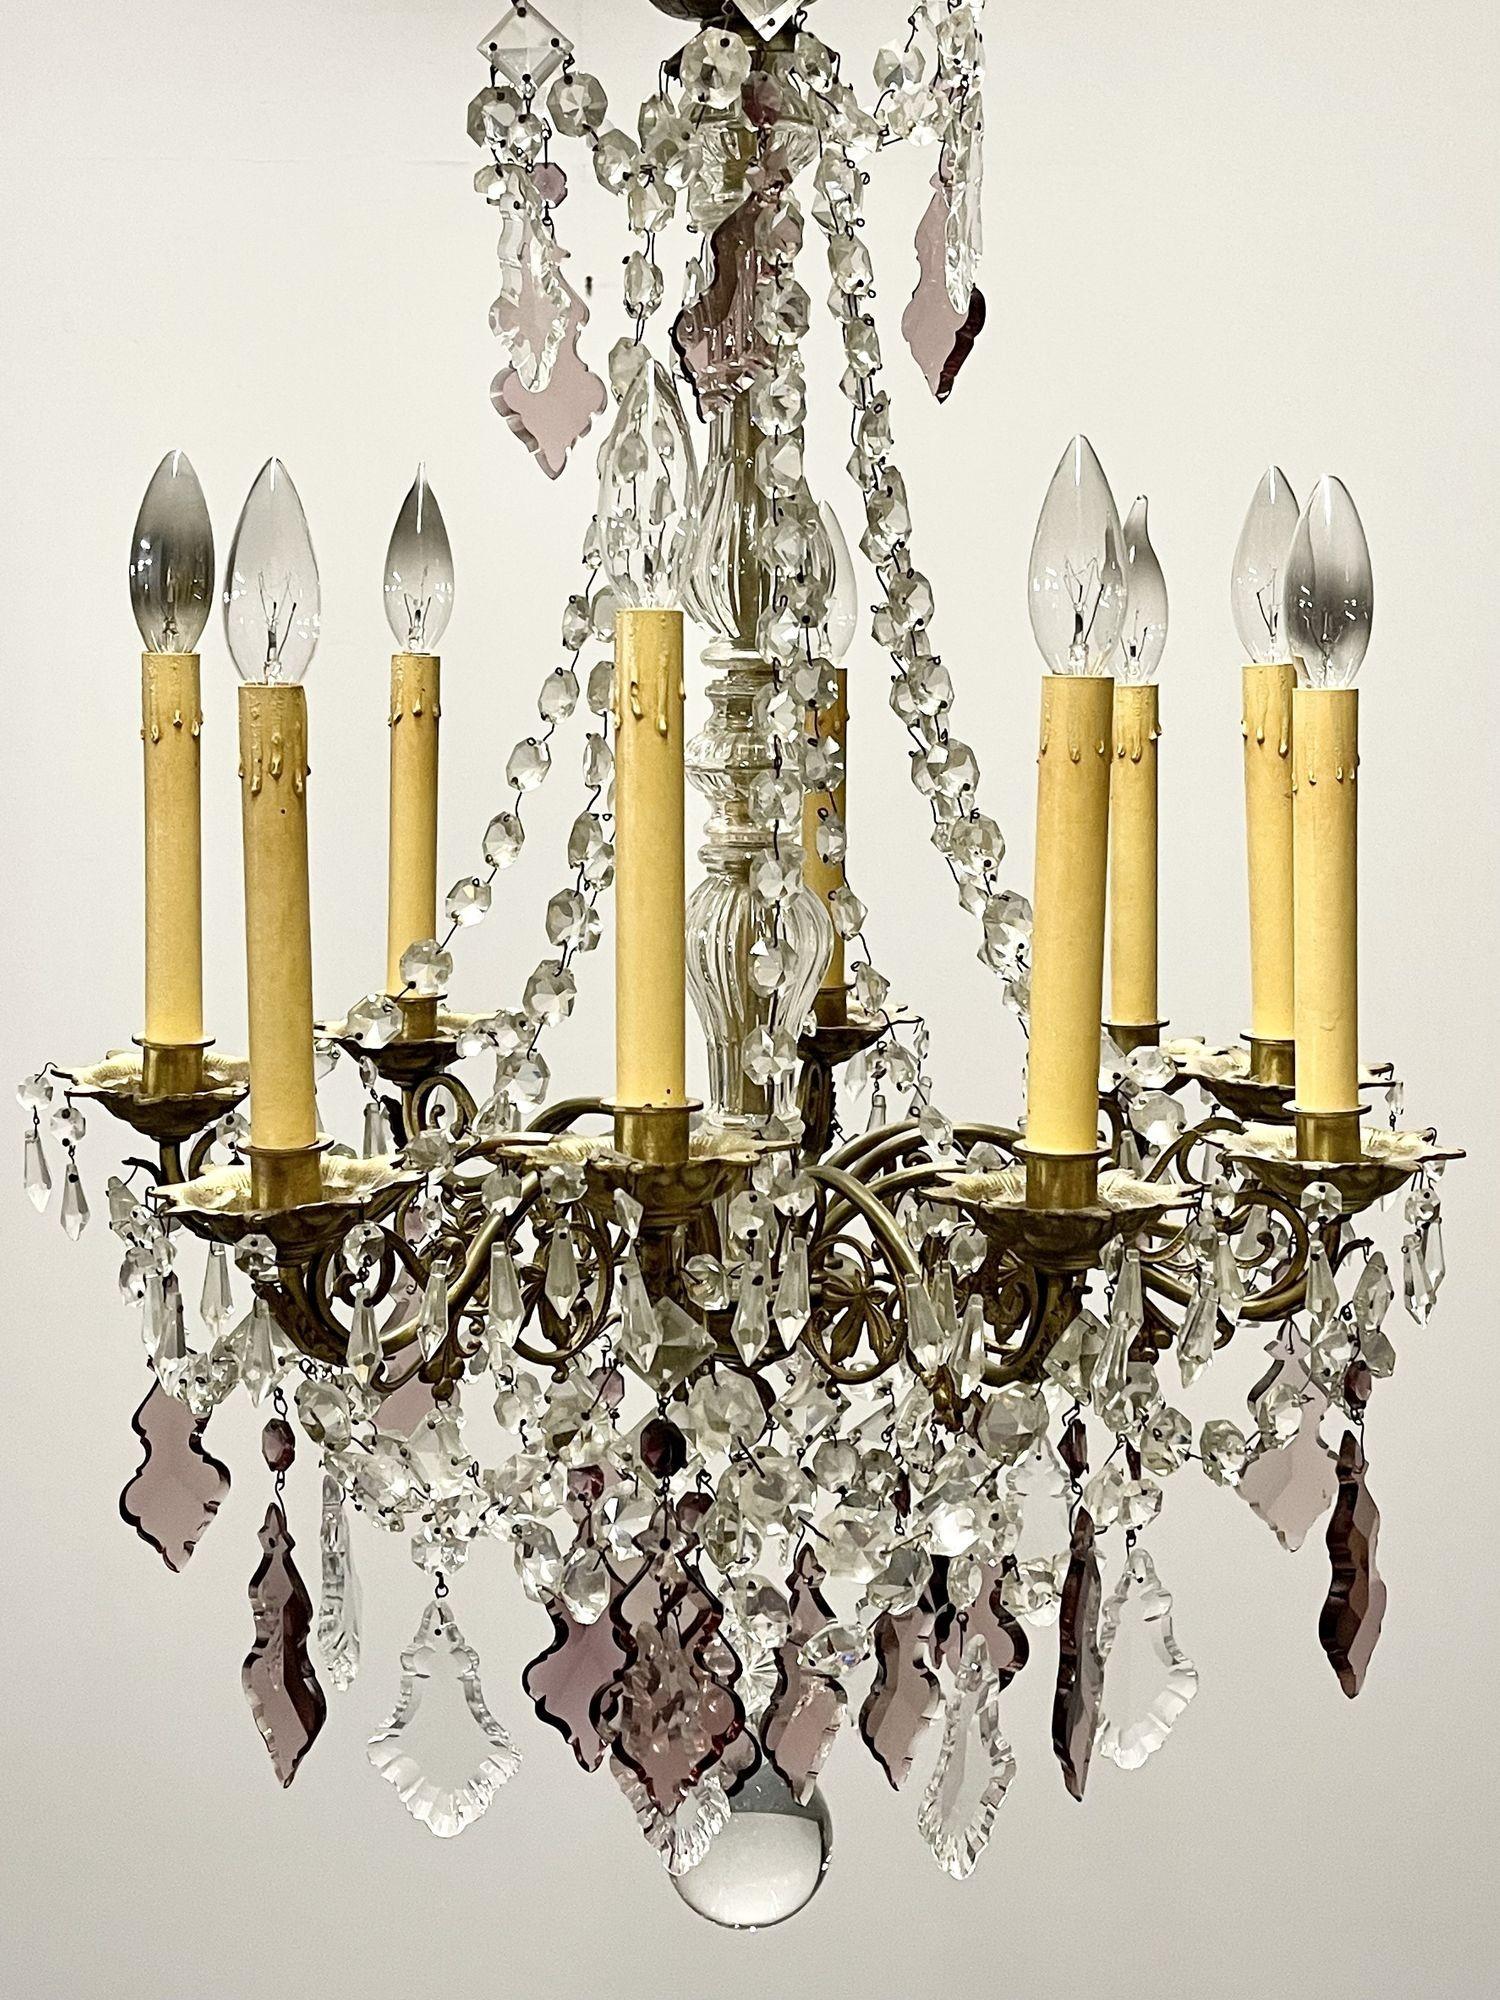 A stunning French dore bronze chandelier of Louis XVI Style having 9 lights. The finely chased bronze having colored and clear crystals dated to the late 19th century. The center column form flanked by drapery crystals form a small ballroom look. 
